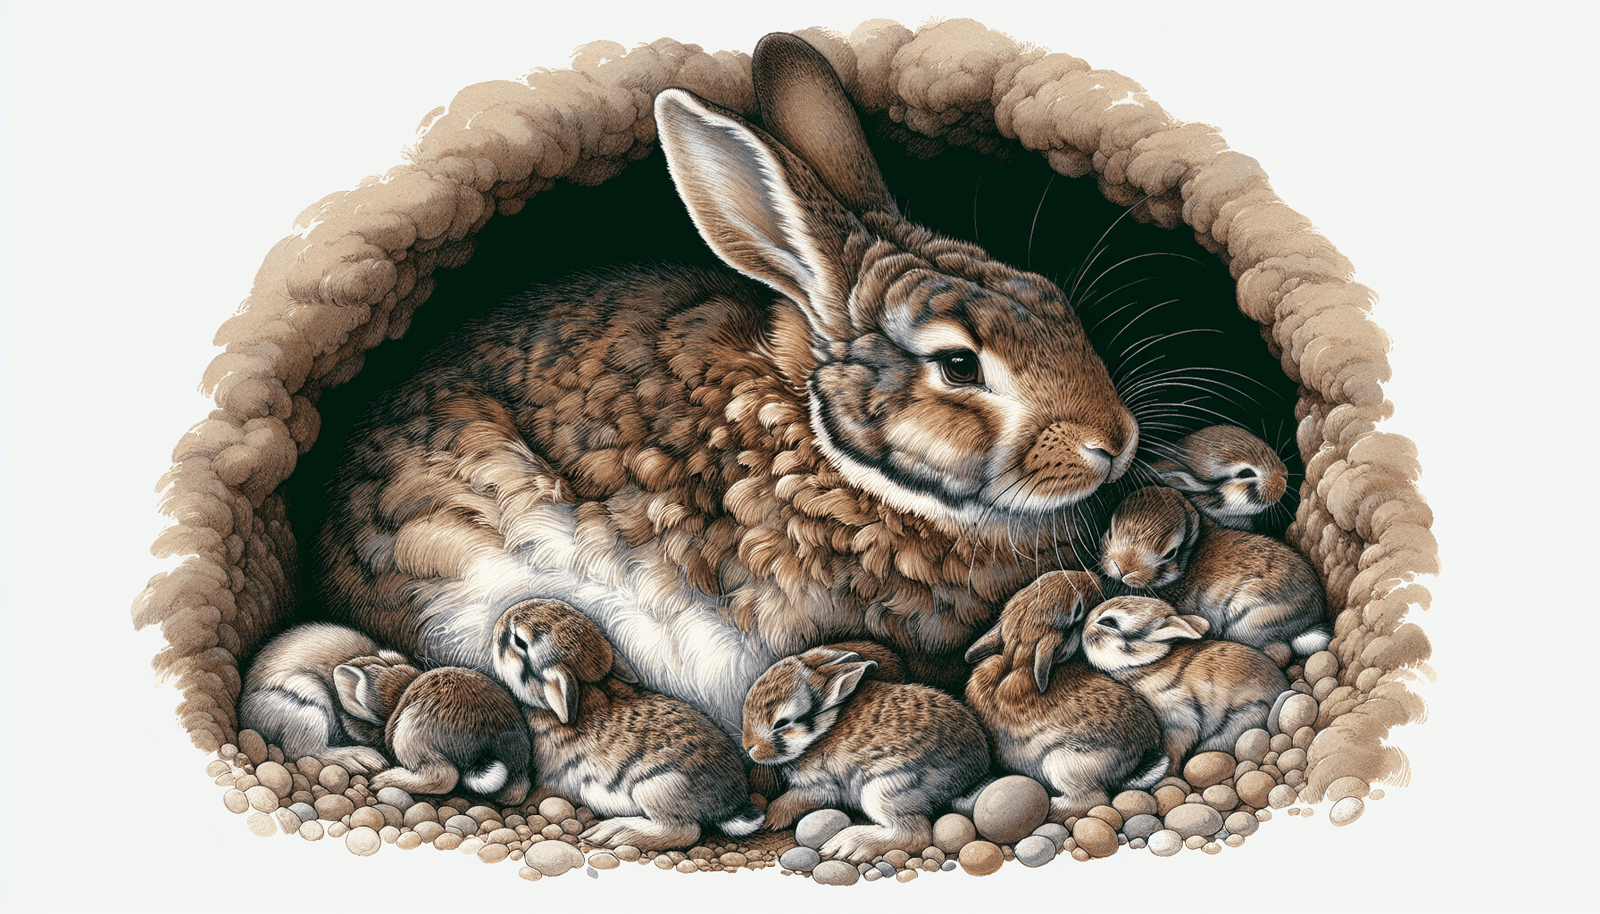 Illustration of a mother rabbit with her litter of kits